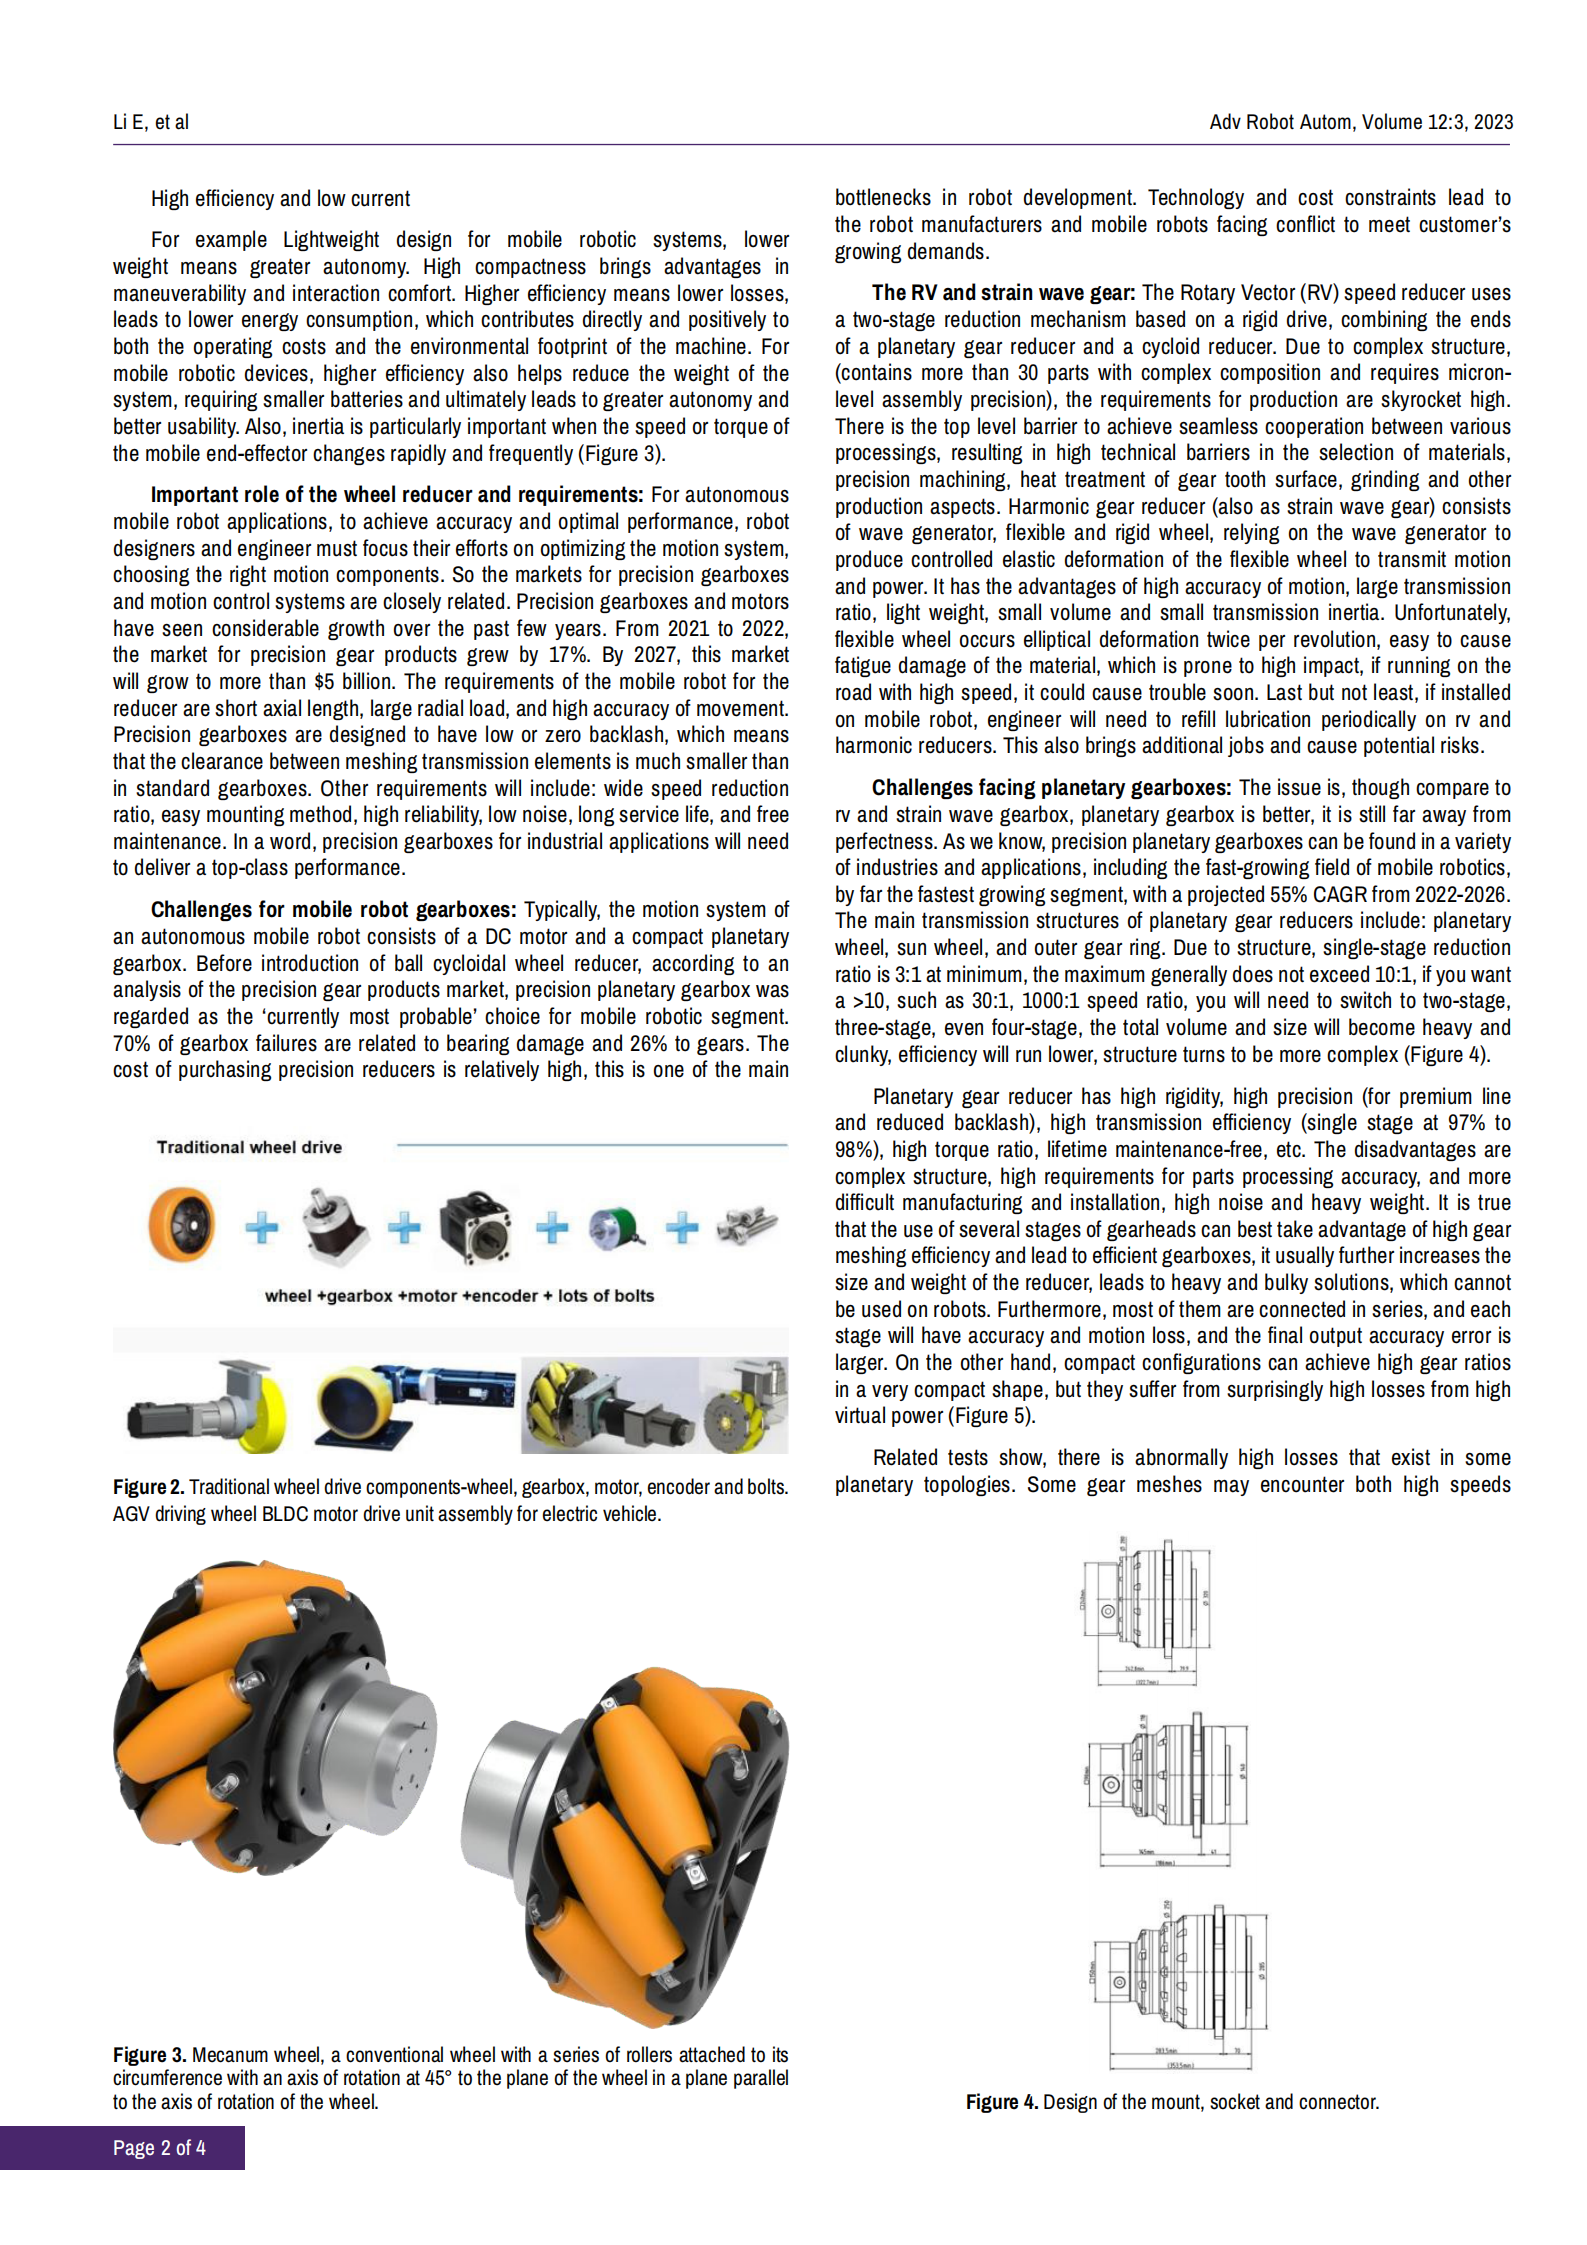 why-precision-ball-cycloidal-reducer-drives-mobile-robot--to-perfect-at-unmatched-cost-benefit (1)_01.png